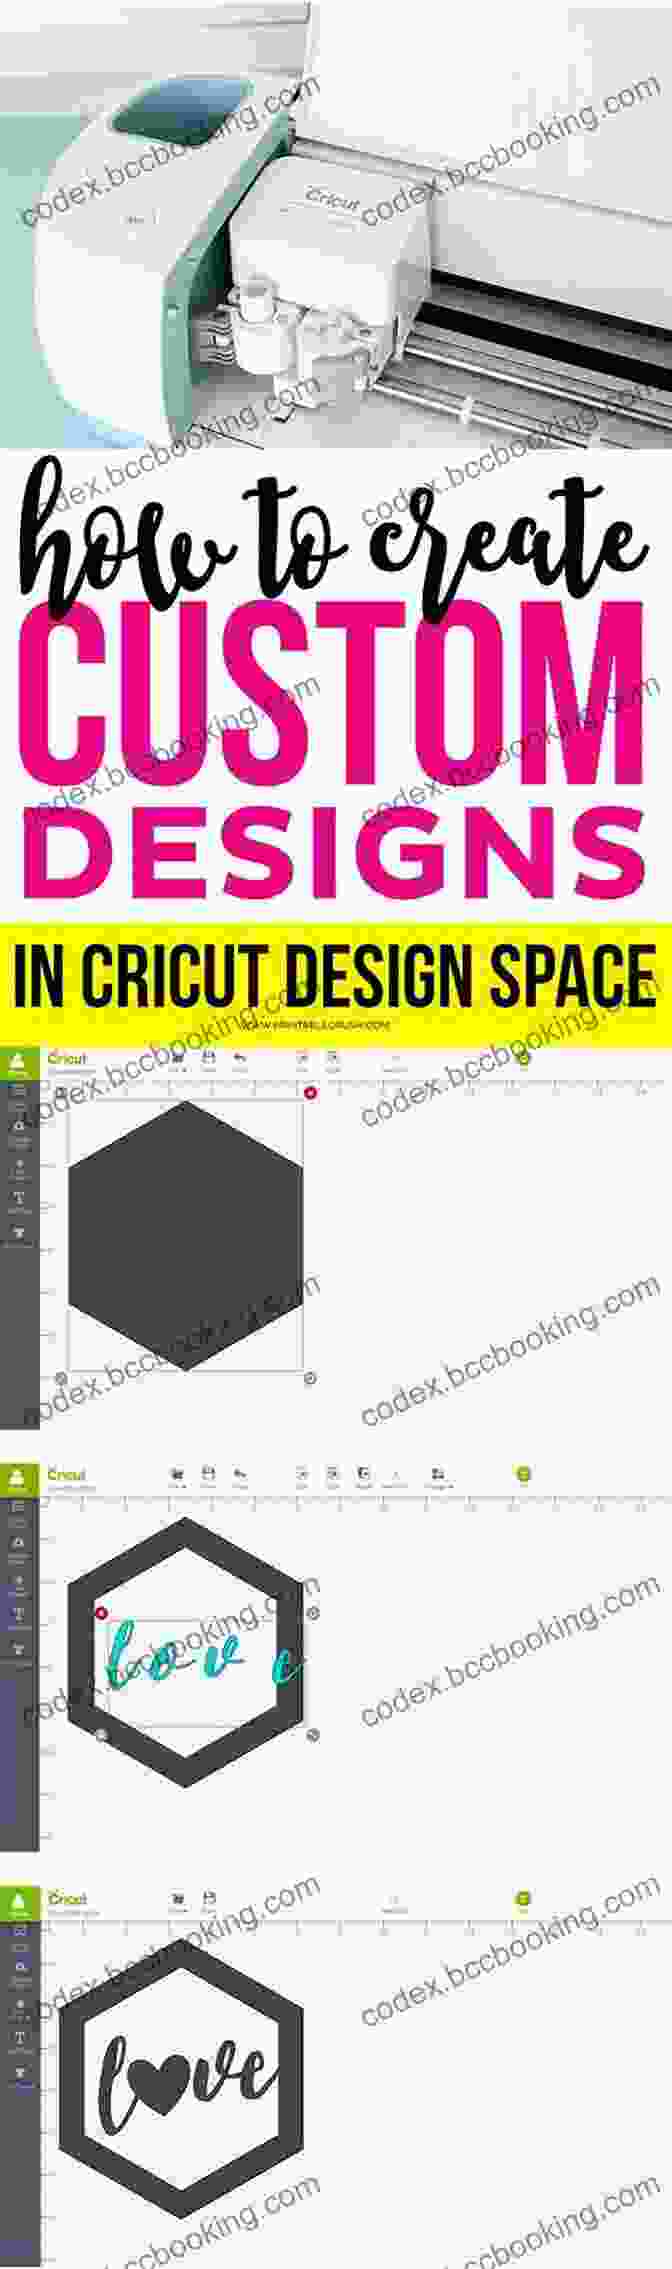 Getting Started With Cricut Design Space Cricut: A Step By Step Guide For Beginners Design Space Project Ideas Tips And Tricks Master The Art Of Cricut Machine With Illustrated Practical Examples